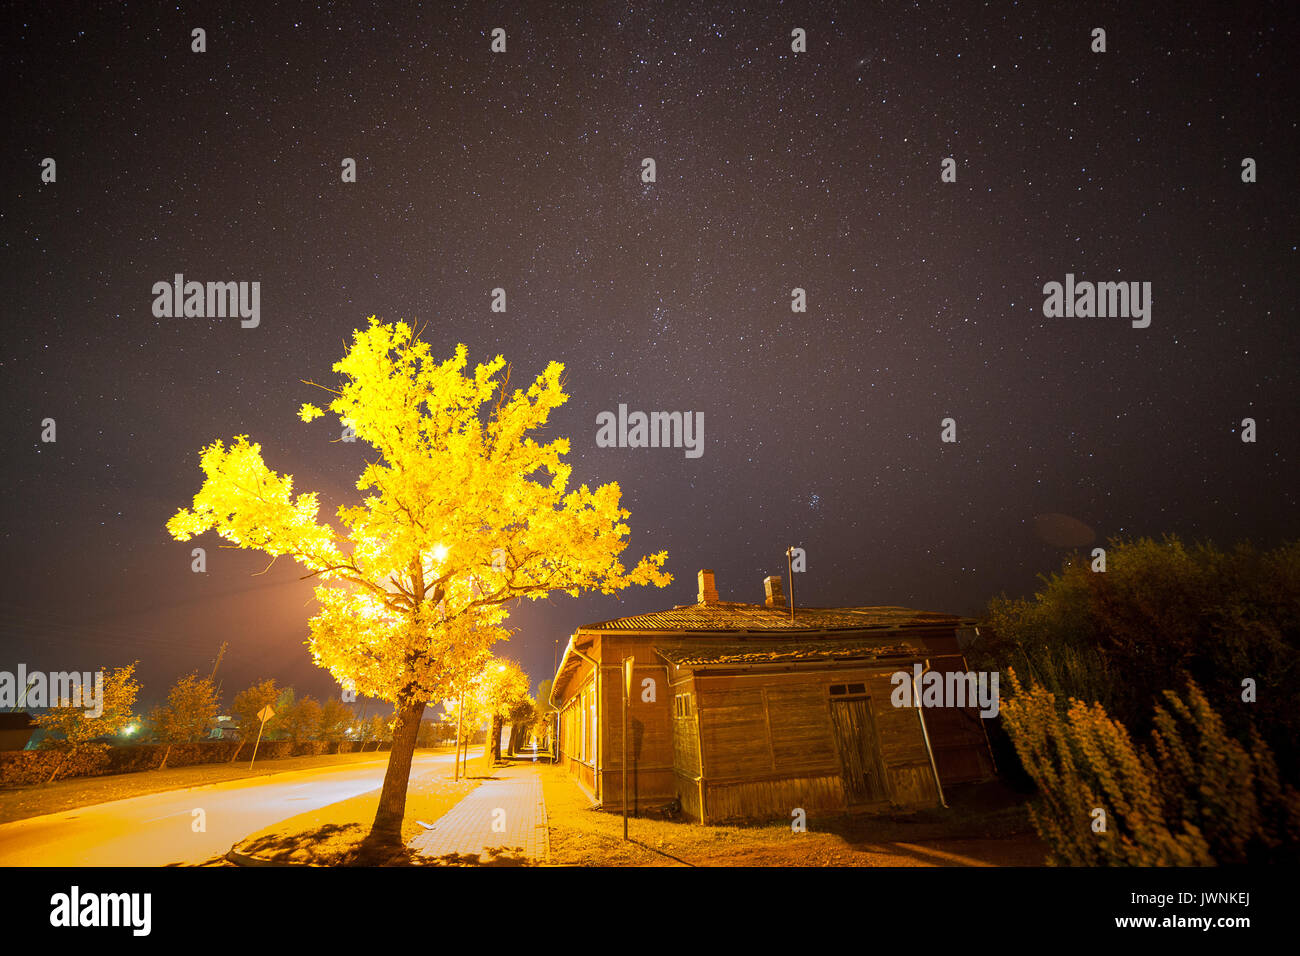 Starry sky over small town street with old wooden houses. Autumn time, Stock Photo